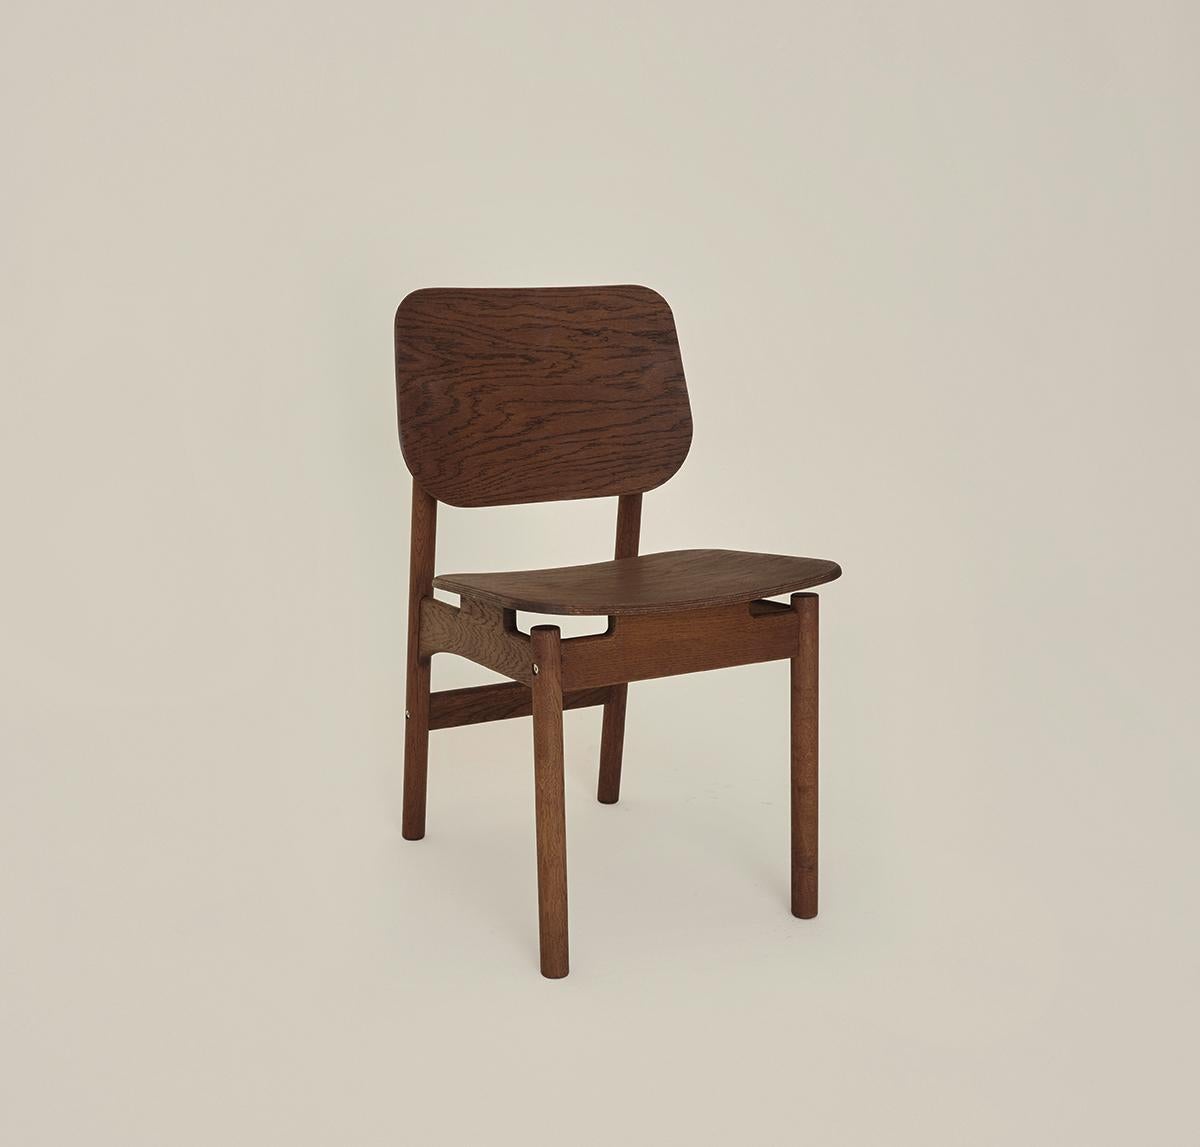 KITA LIVING Frame Chair  Rectangular - Oak Chocolate In New Condition For Sale In Bomonti, TR